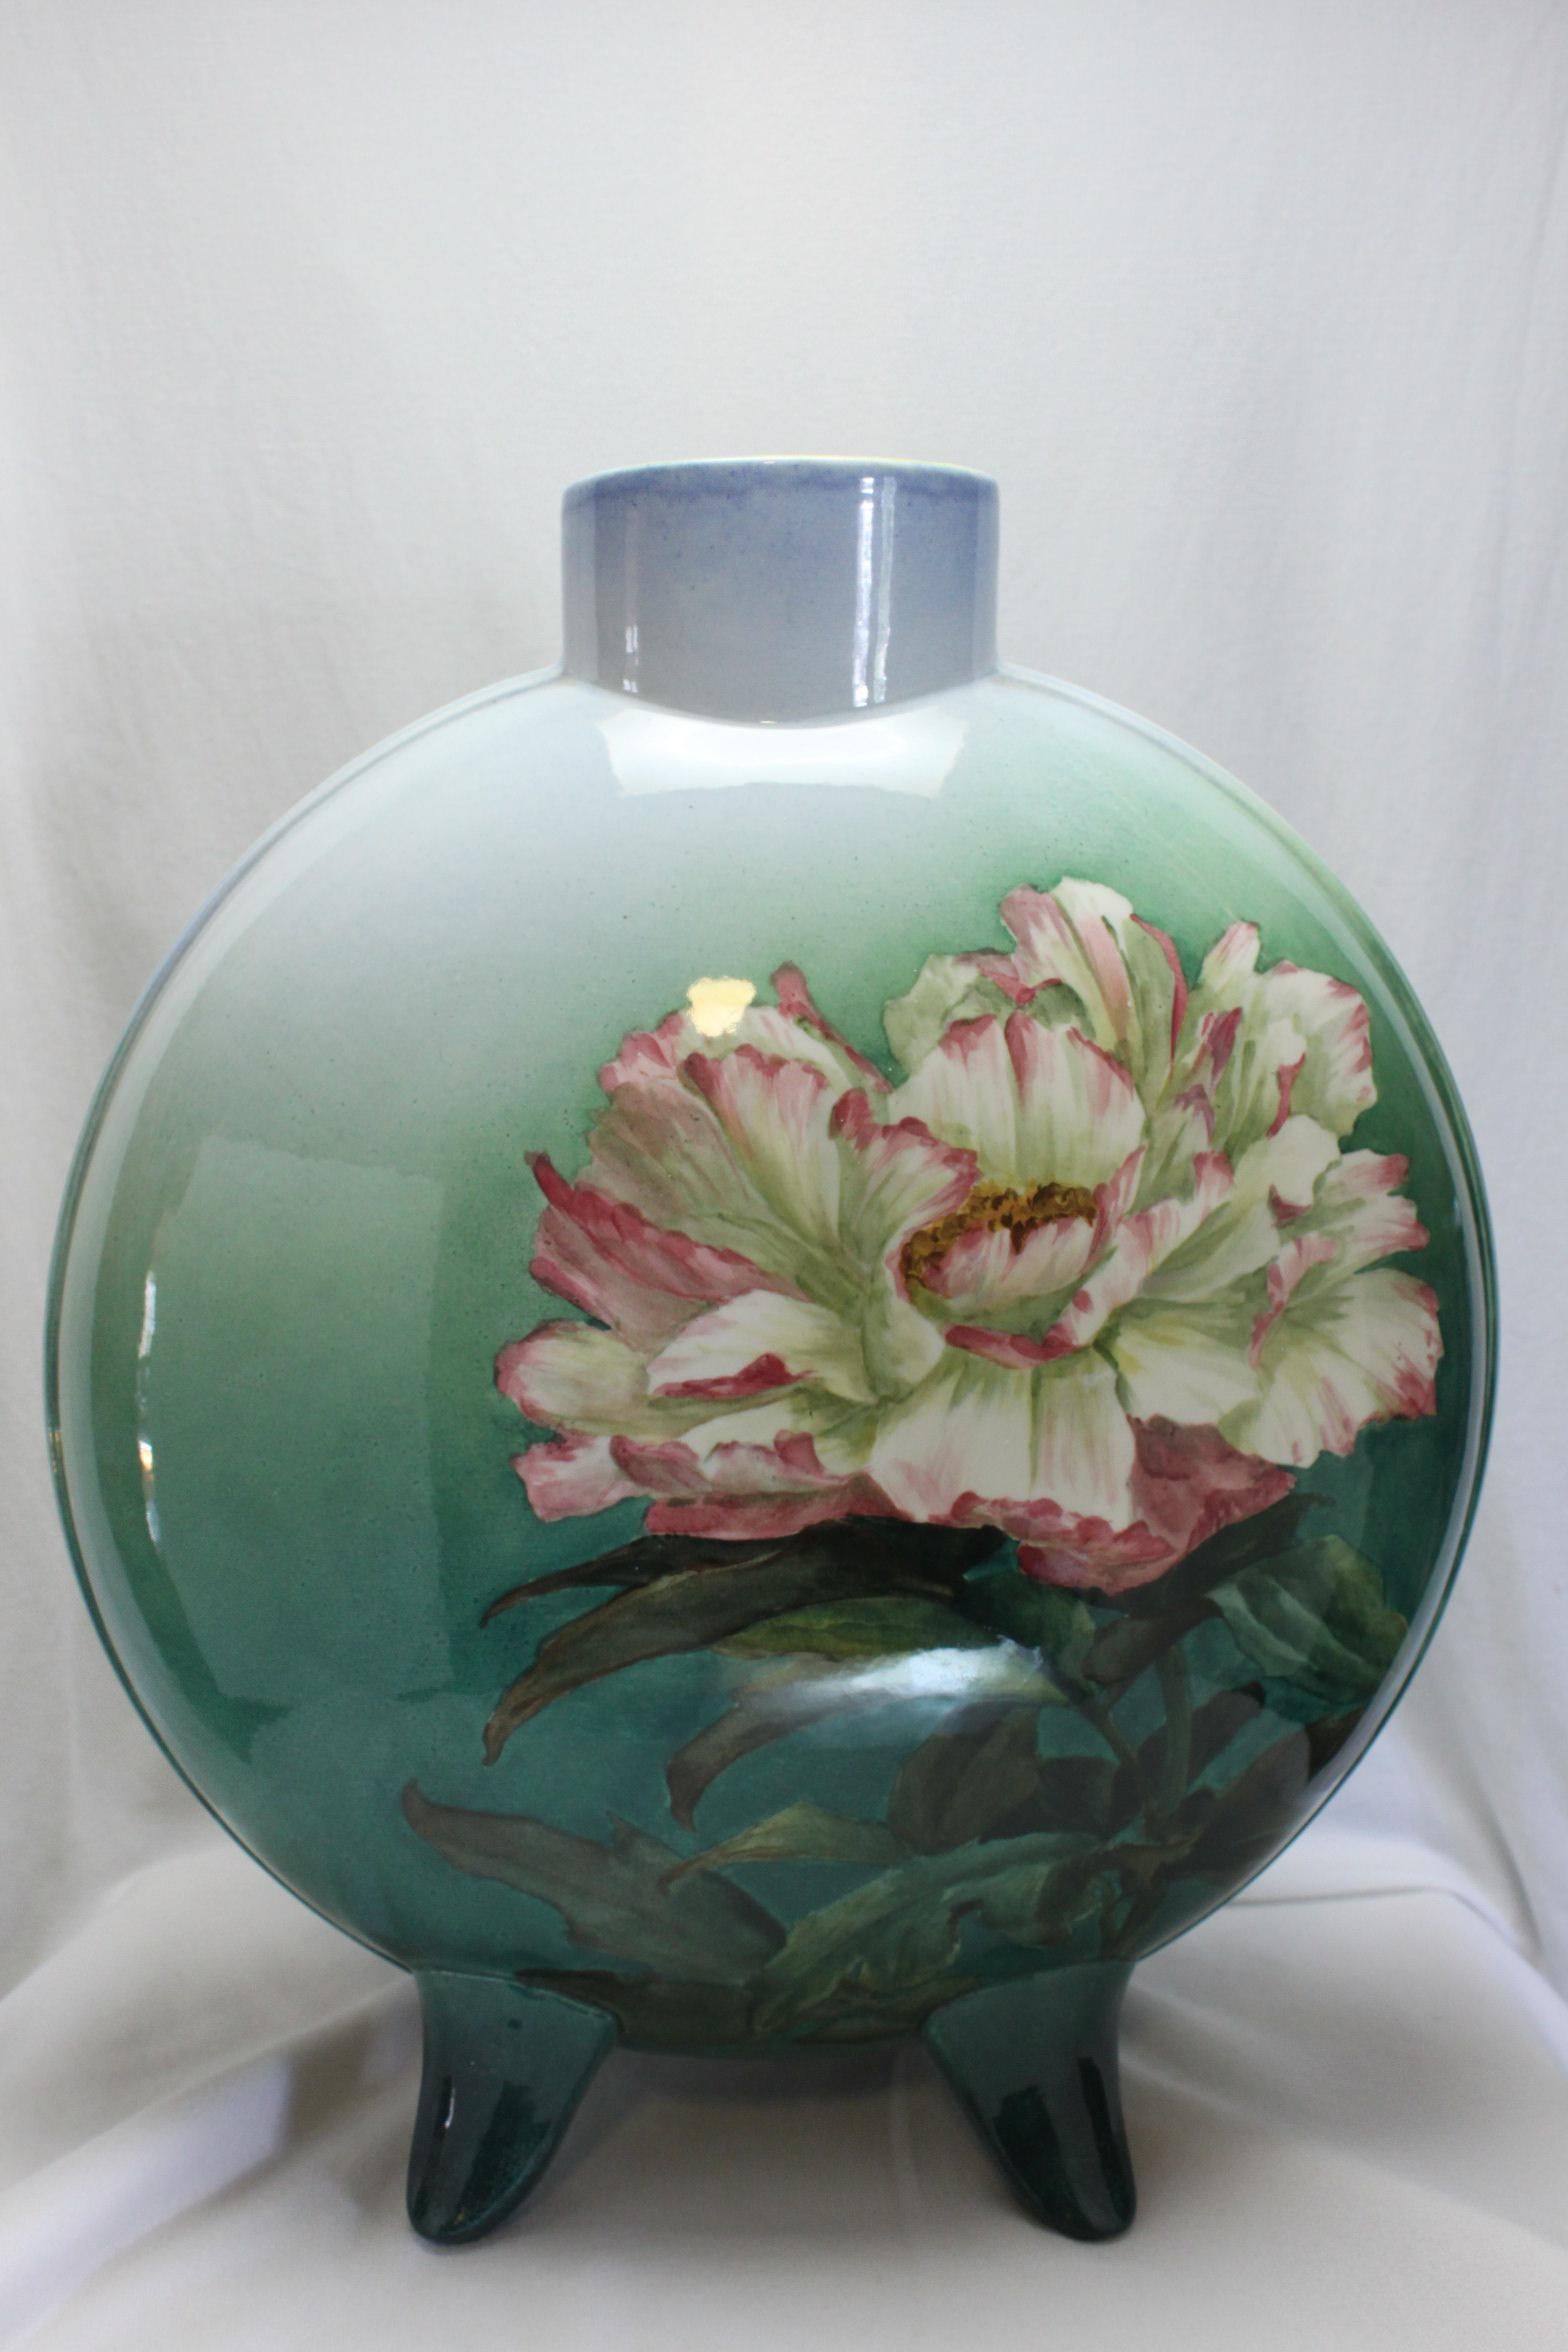 This very large Doulton Lambeth Faience flask vase was painted by Katherine (Katie) Smallfield, who worked at Doulton from c1882-1912. Both sides of the vase are decorated with a single large flower on a graduated green ground. It stands 360 mm